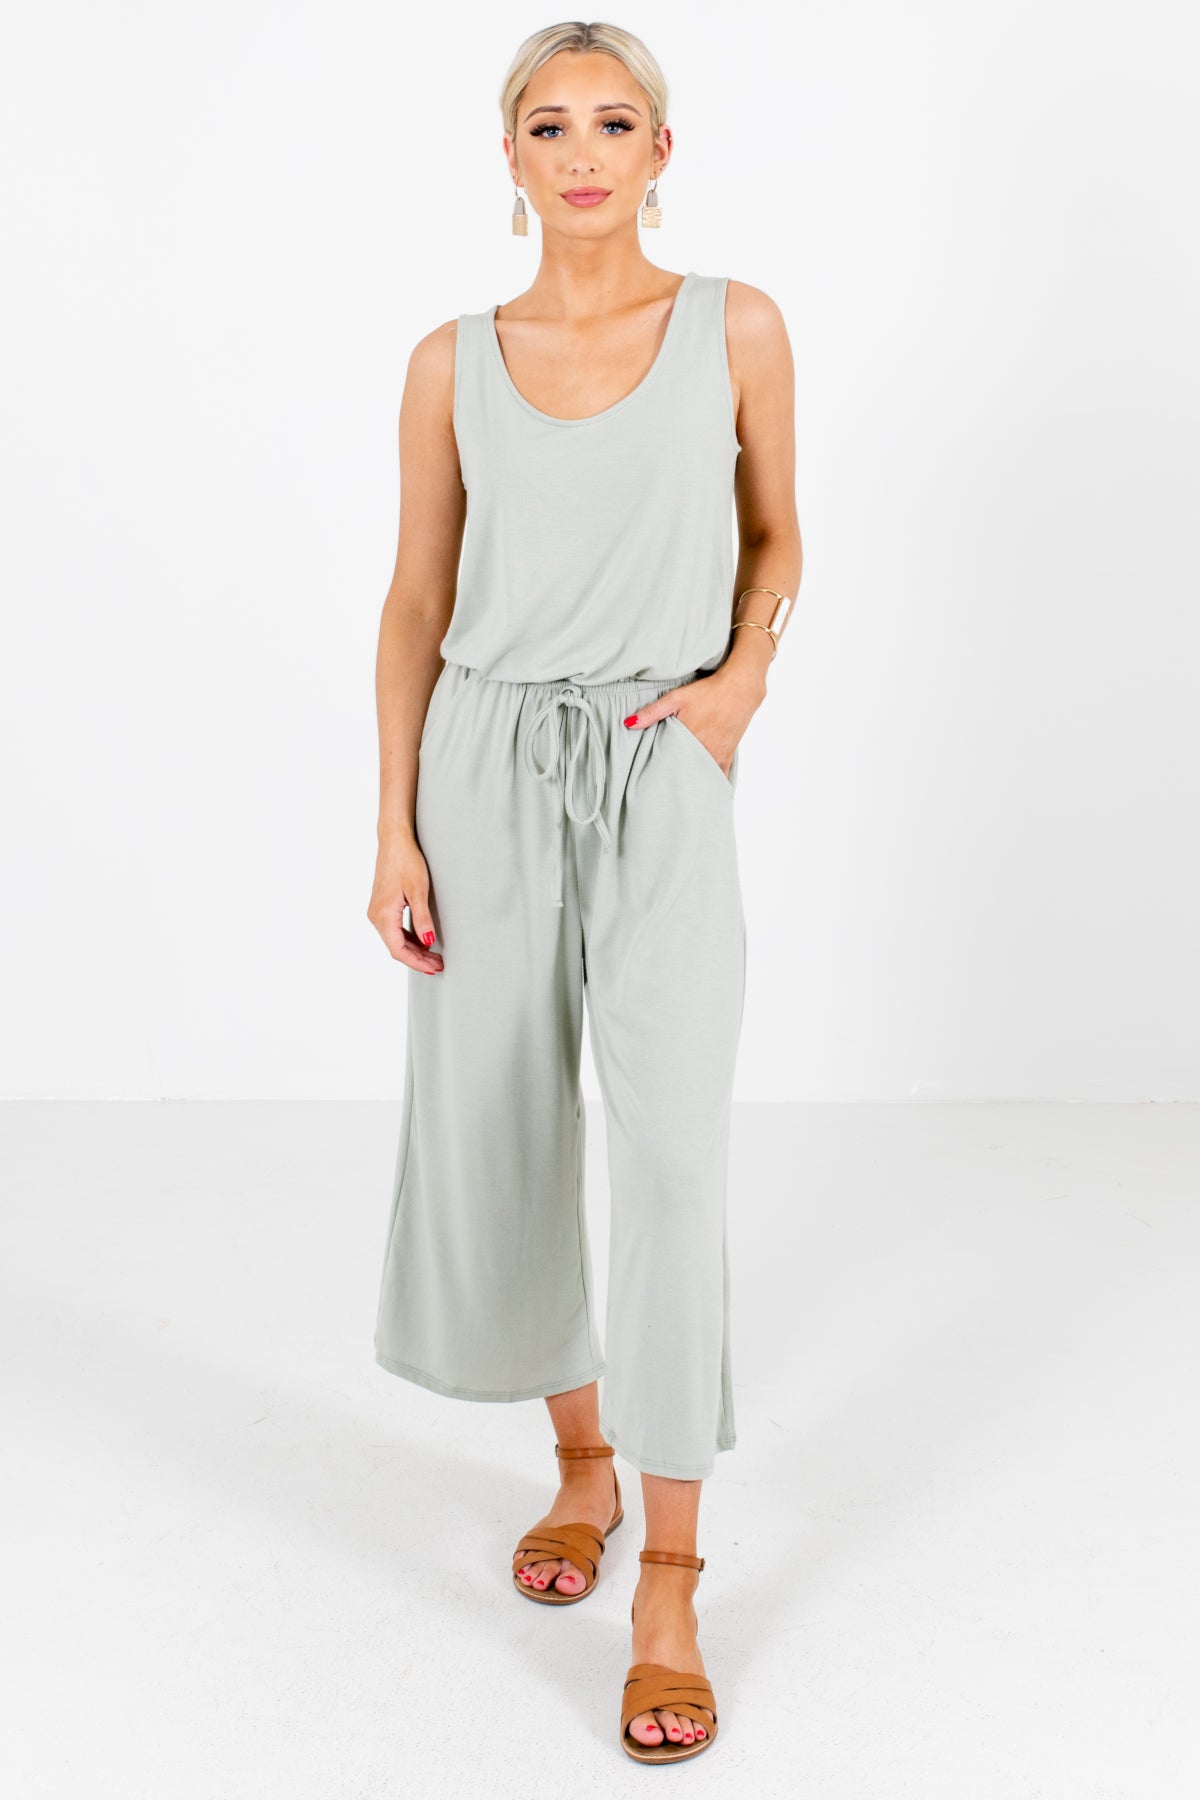 Green Cute and Comfortable Boutique Jumpsuits for Women